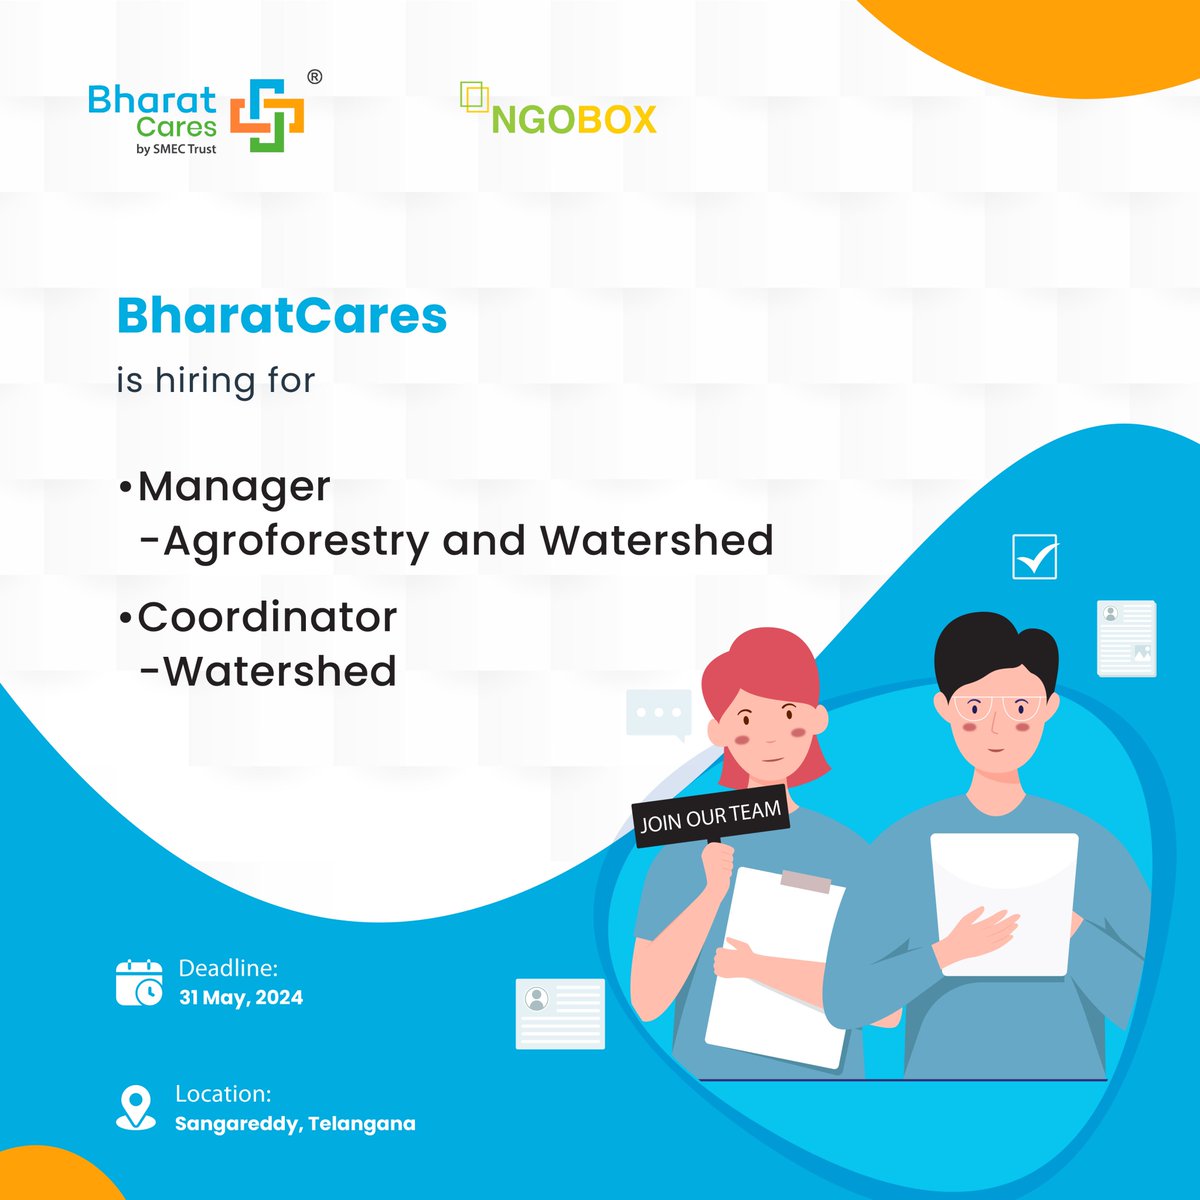 #JobOpening @bharatcaresorg is hiring for the following positions: Manager- Agroforestry and Watershed - bharatcares.org/career/job-det… Coordinator- Watershed - bharatcares.org/career/job-det… Location: Sangareddy, Telangana Deadline: 31 May 2024 #JobOpportunity #Agroforestry #Watershed